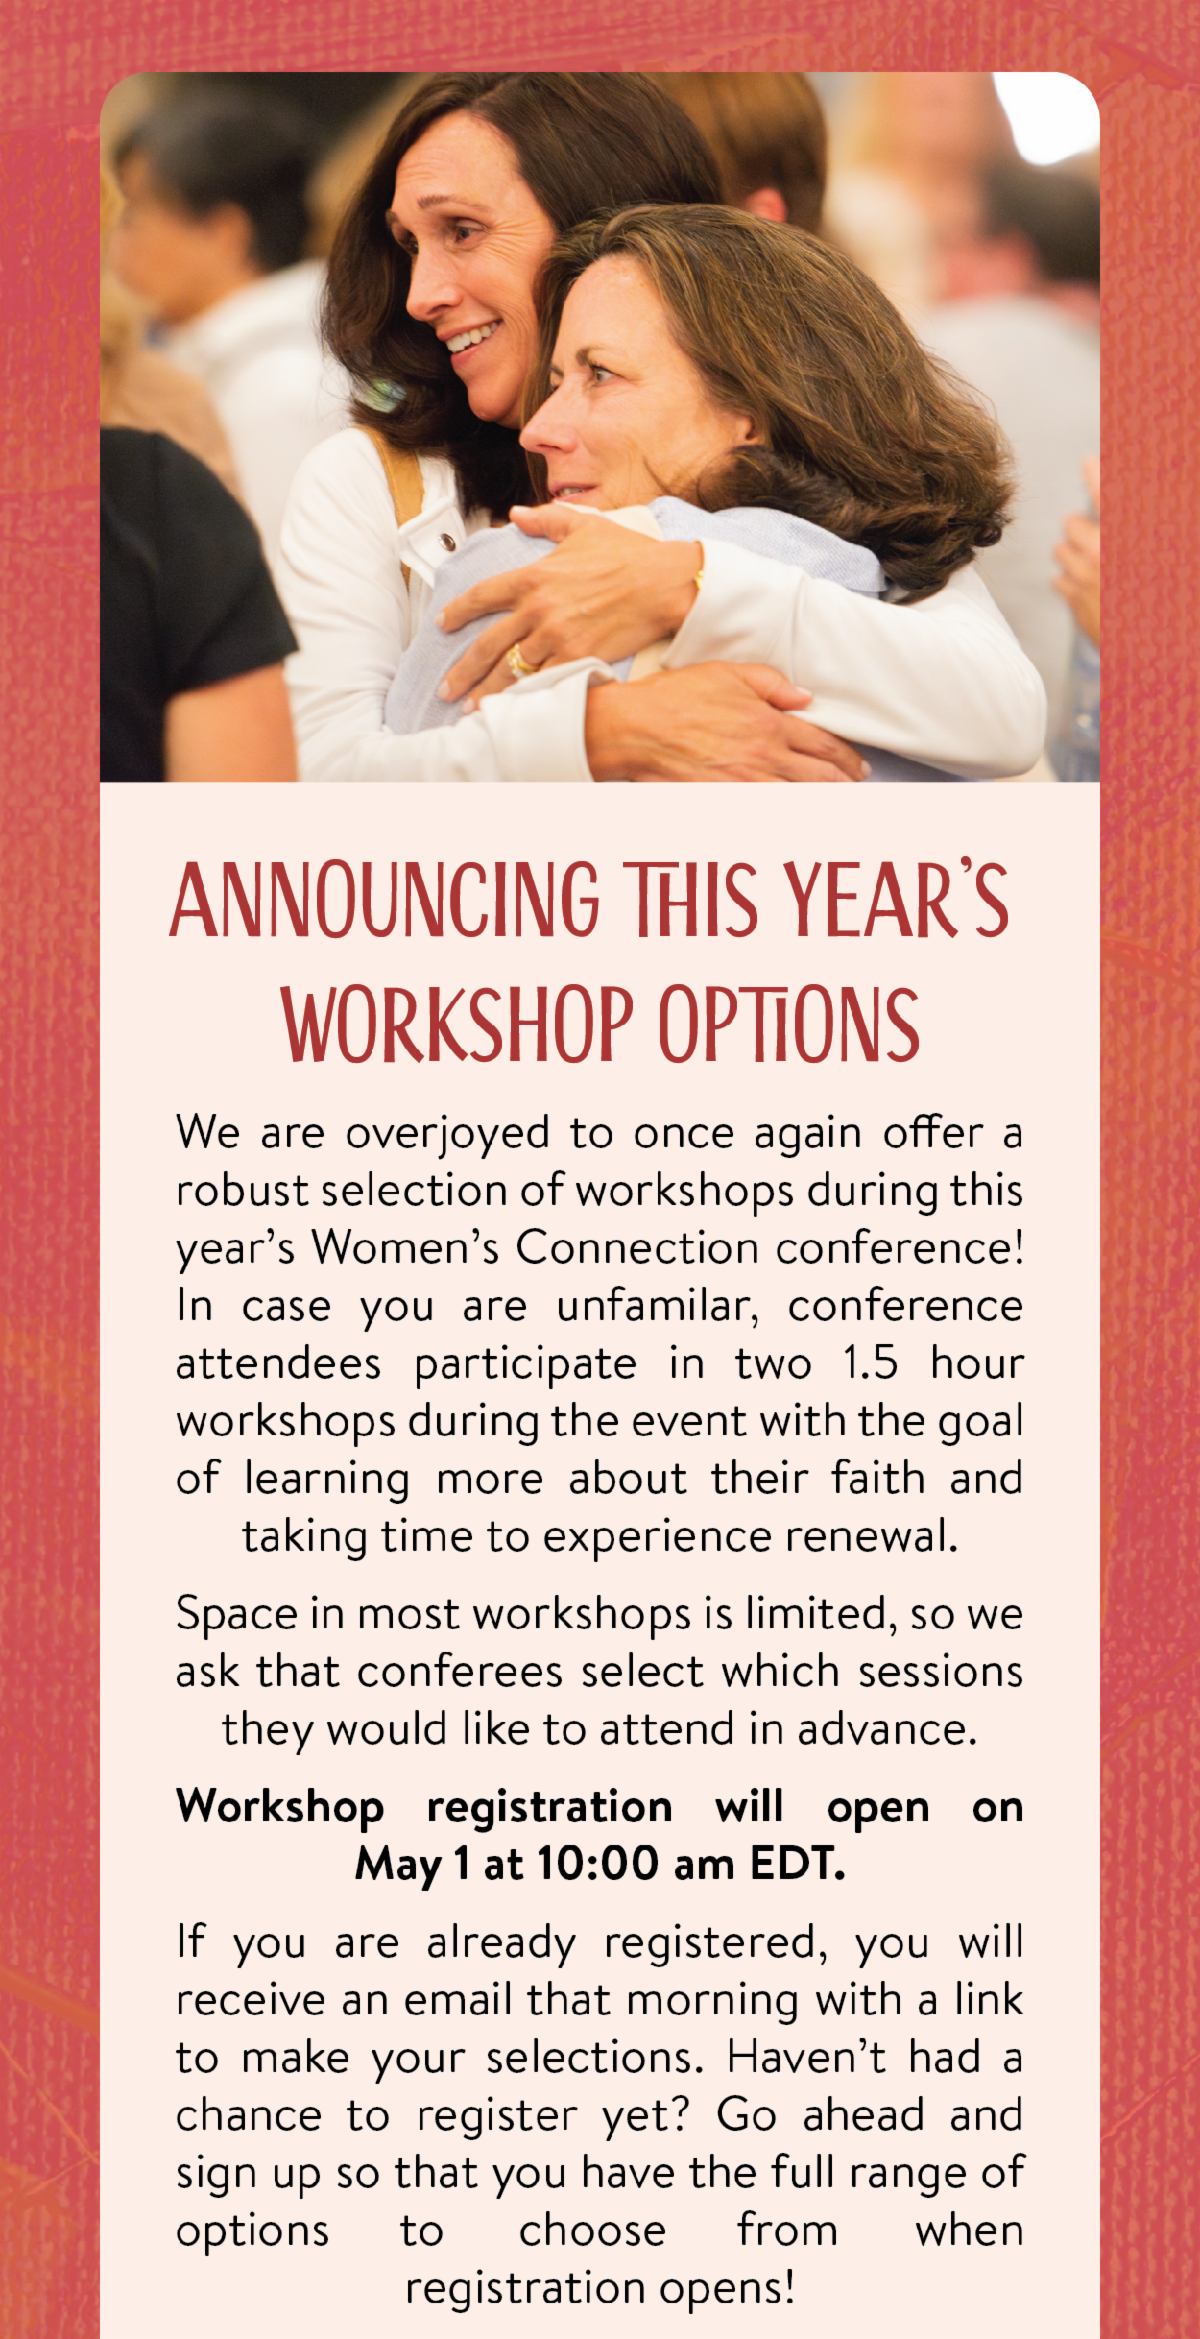 Announcing This Year's Workshop Options - We are overjoyed to once again offer a robust selection of workshops during this year’s Women’s Connection conference! In case you are unfamilar, conference attendees participate in two 1.5 hour workshops during the event with the goal of learning more about their faith and taking time to experience renewal. Space in most workshops is limited, so we ask that conferees select which sessions they would like to attend in advance. Workshop registration will open on May 1 at 10:00 am EDT.  If you are already registered, you will receive an email that morning with a link to make your selections. Haven’t had a chance to register yet? Go ahead and sign up so that you have the full range of options to choose from when registration opens!